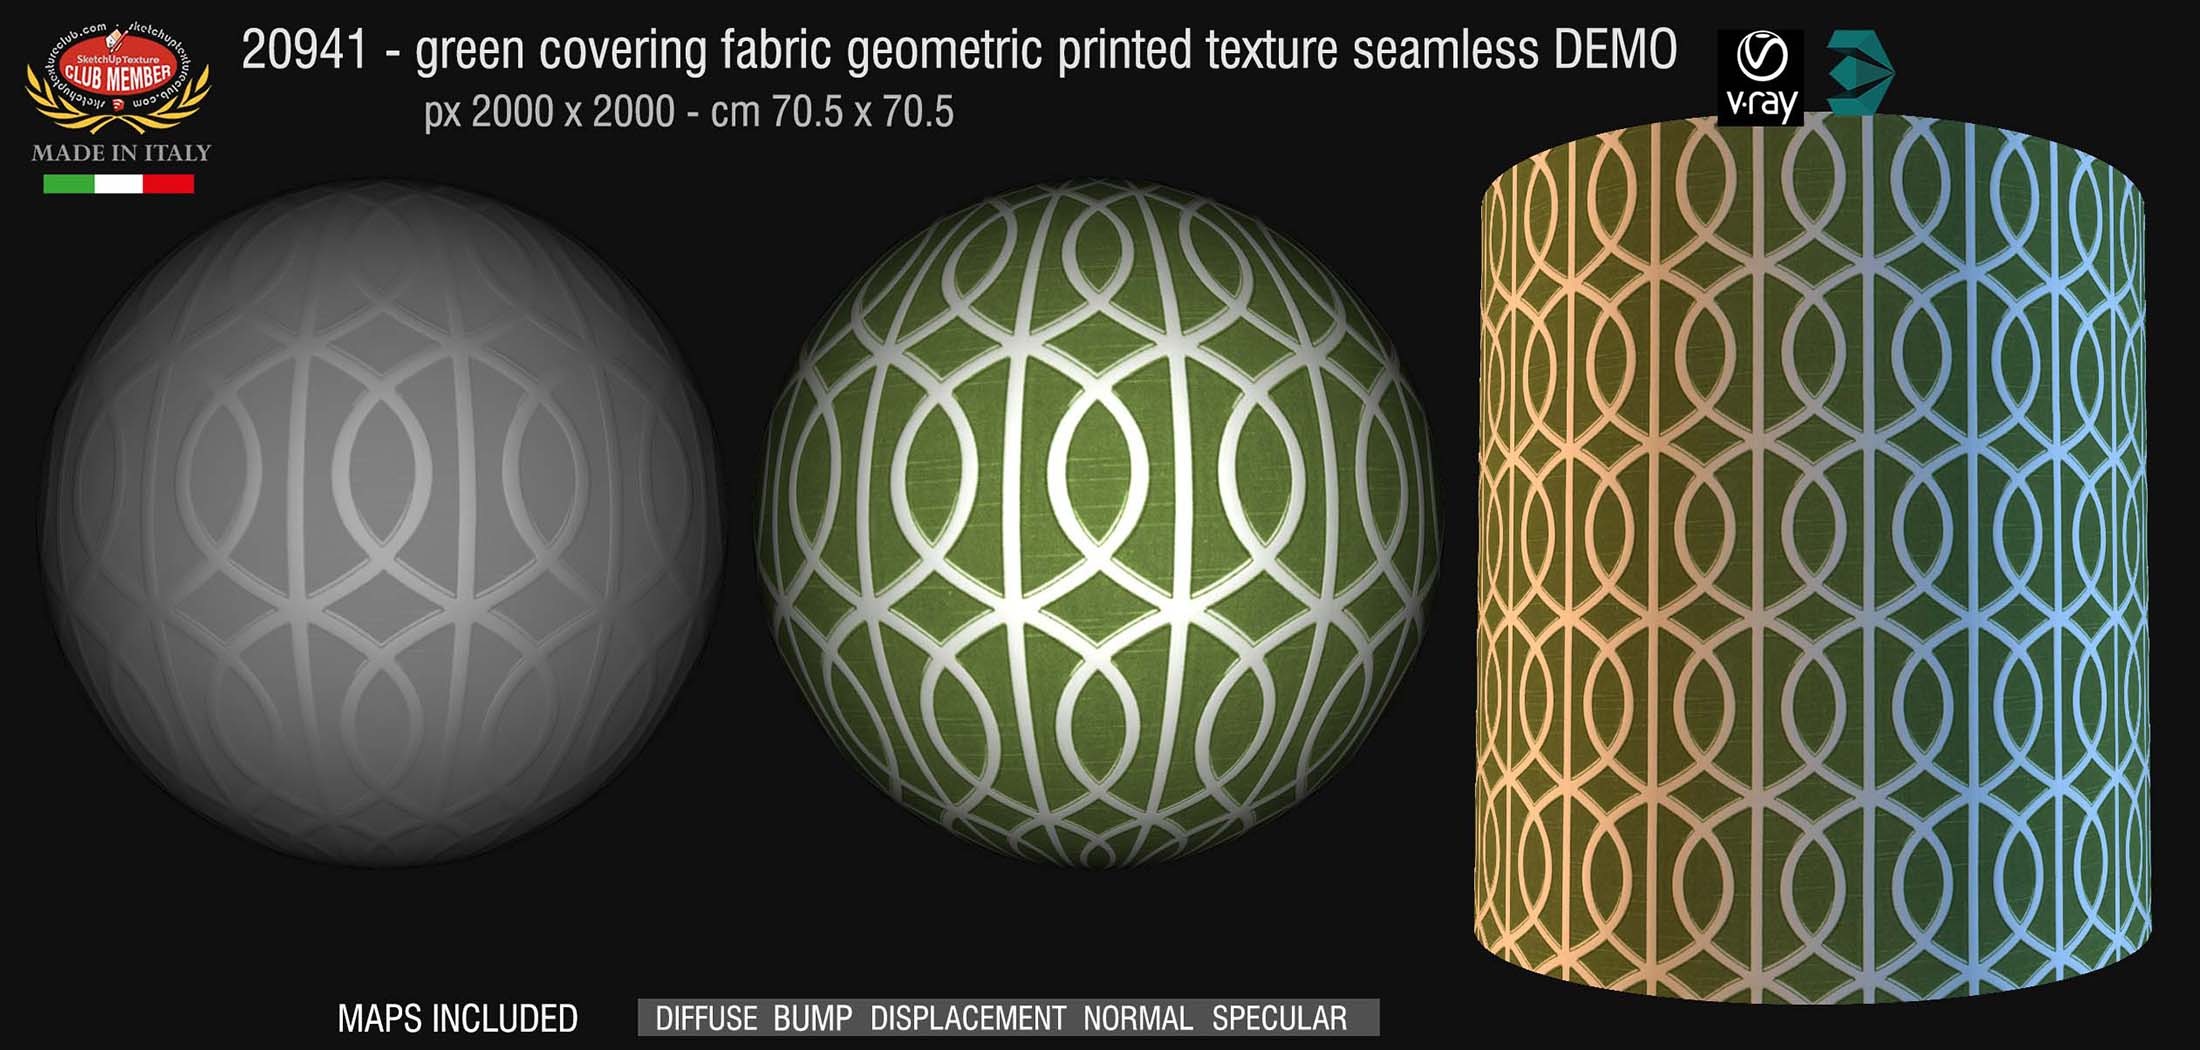 Green covering fabric geometric printed texture + maps DEMO